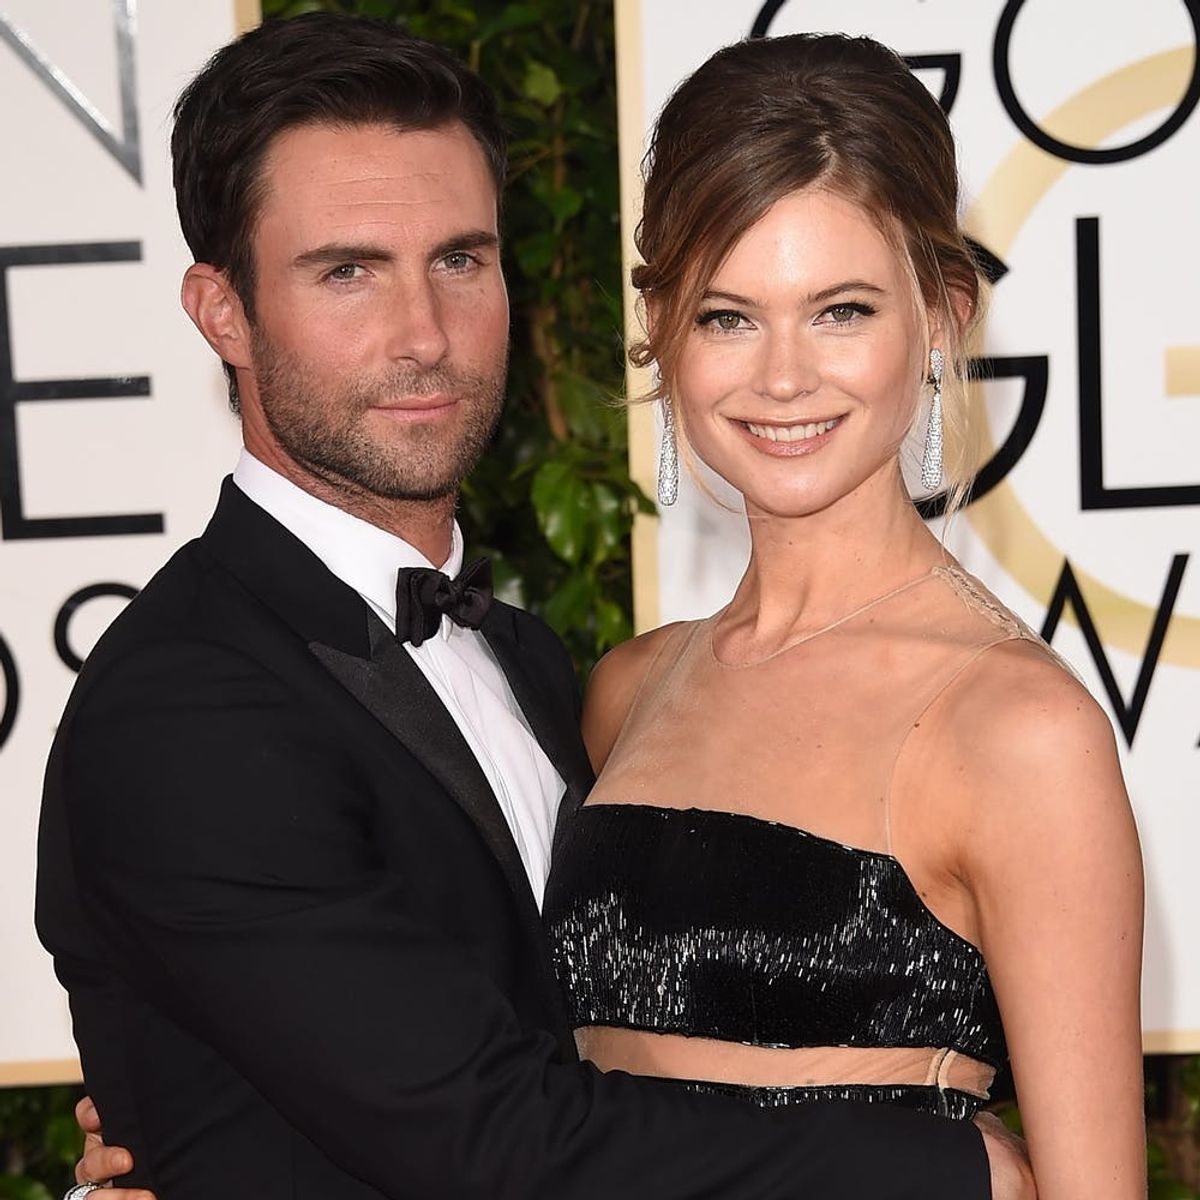 Adam Levine and Behati Prinsloo Just Shared the First Glimpse of Newborn Daughter Gio Grace